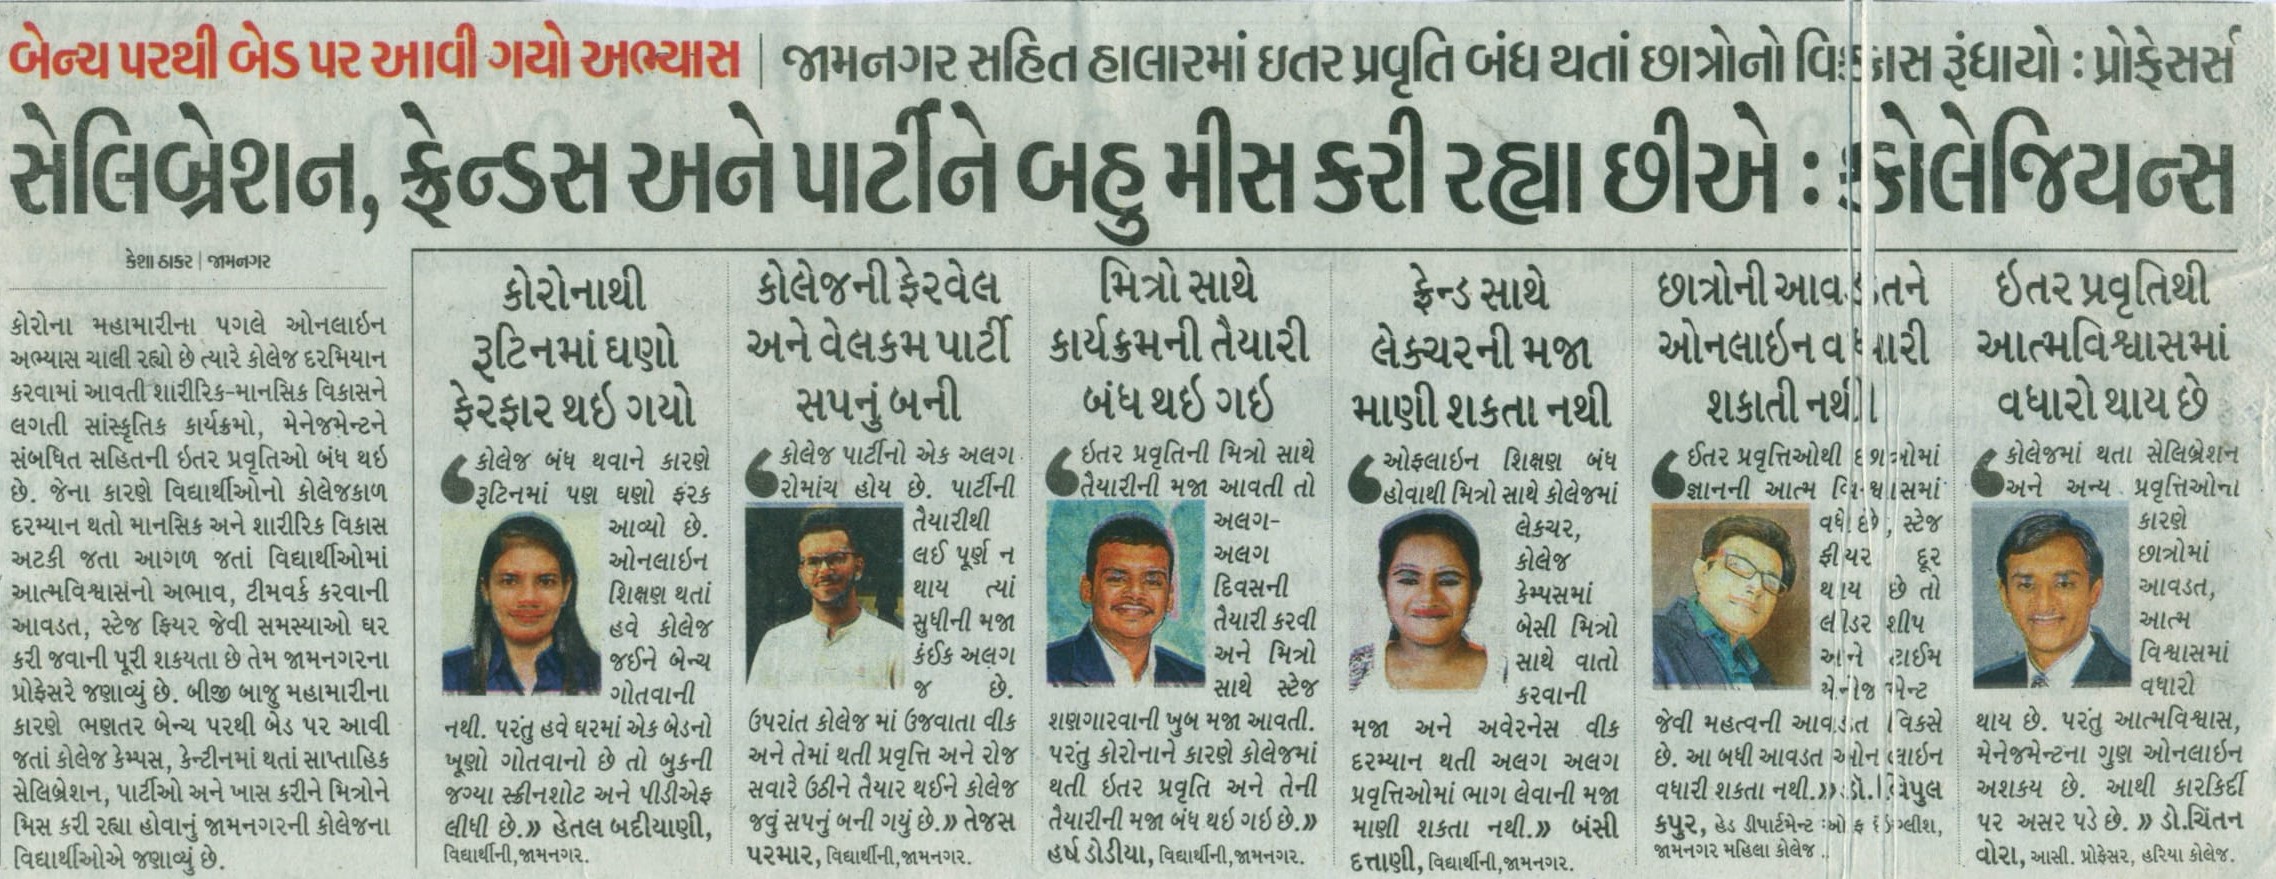 STUDENTS REVIEW ON COLLEGE LIFE DURING COVID DIVYA BHASKAR 6.6.21